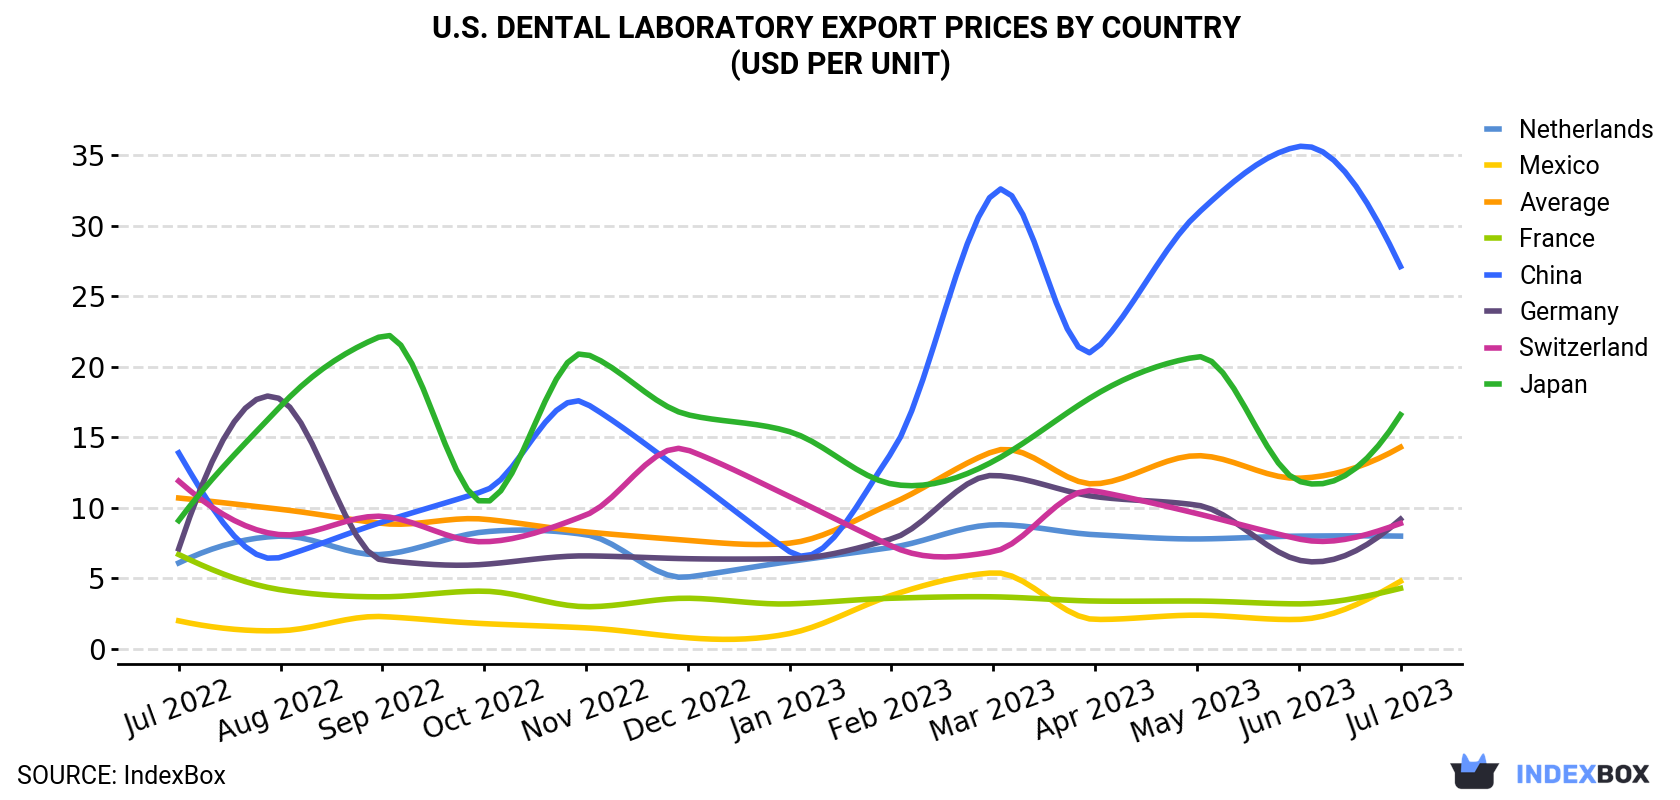 U.S. Dental Laboratory Export Prices By Country (USD Per Unit)